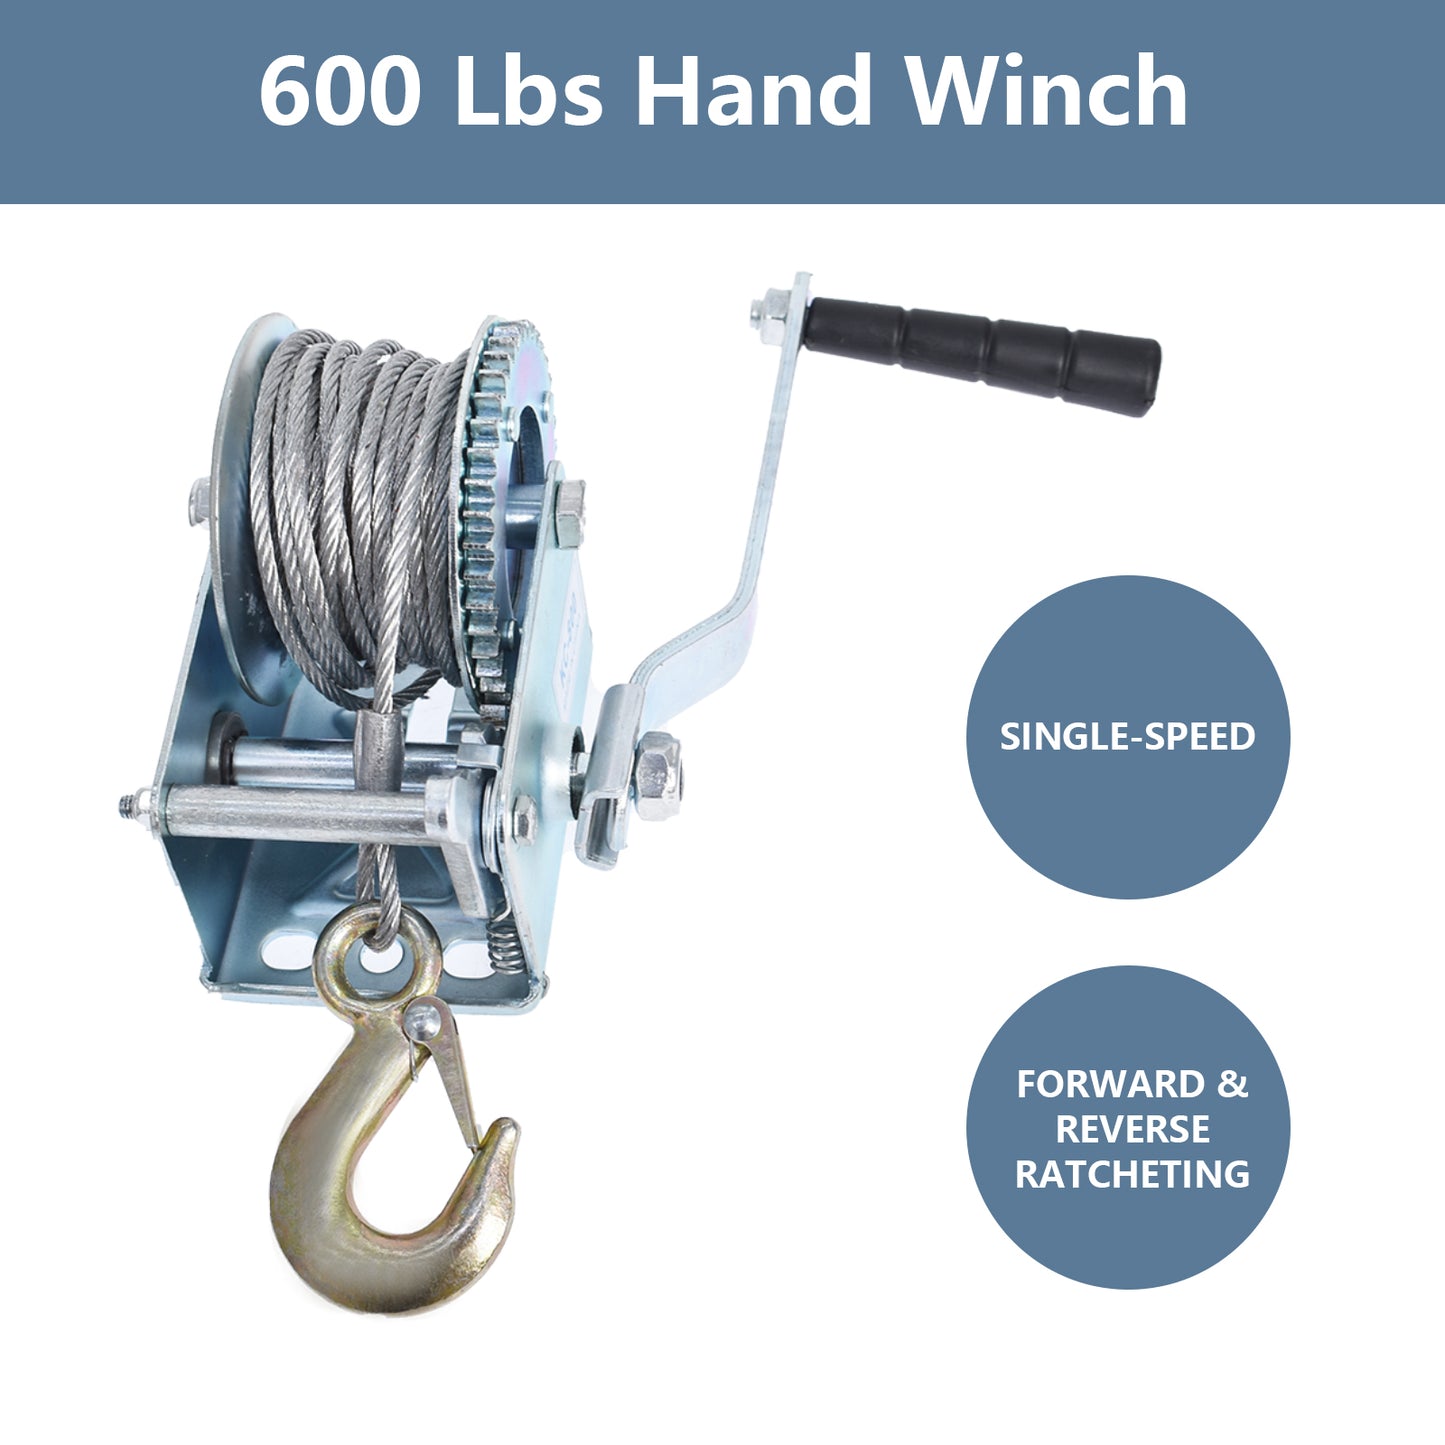 findmall Heavy Duty Hand Winch 600Lbs Hand Crank Strap Gear with 8m Steel Wire Manual Operated Two-Way Ratchet ATV Boat Trailer Marine for Trailering or Loading Boats Personal Watercraft and Lawn Equipment Findmall